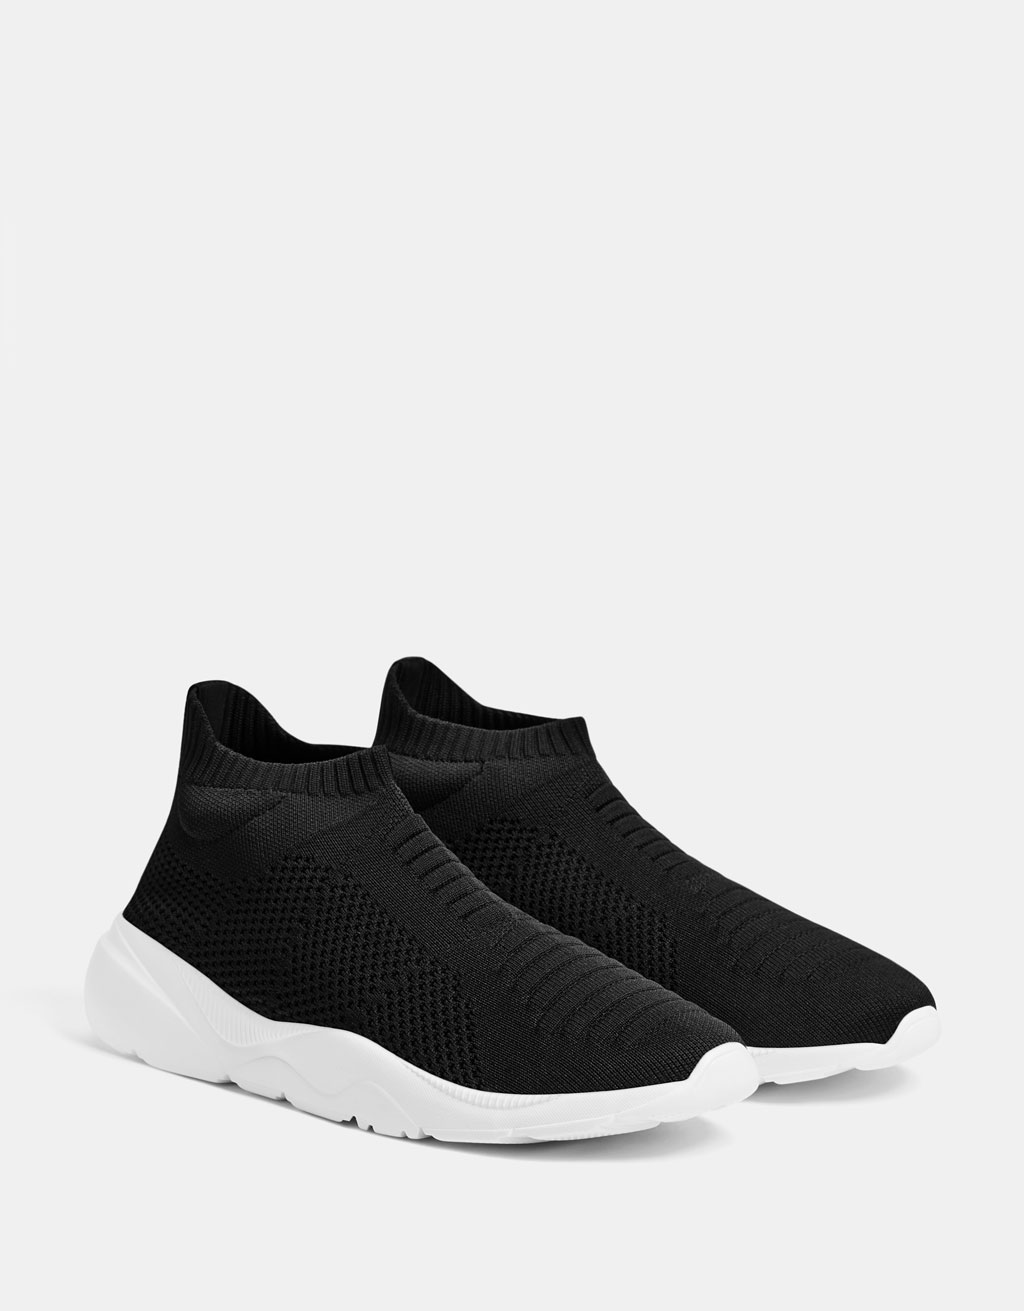 Men's sock-style high-top trainers 